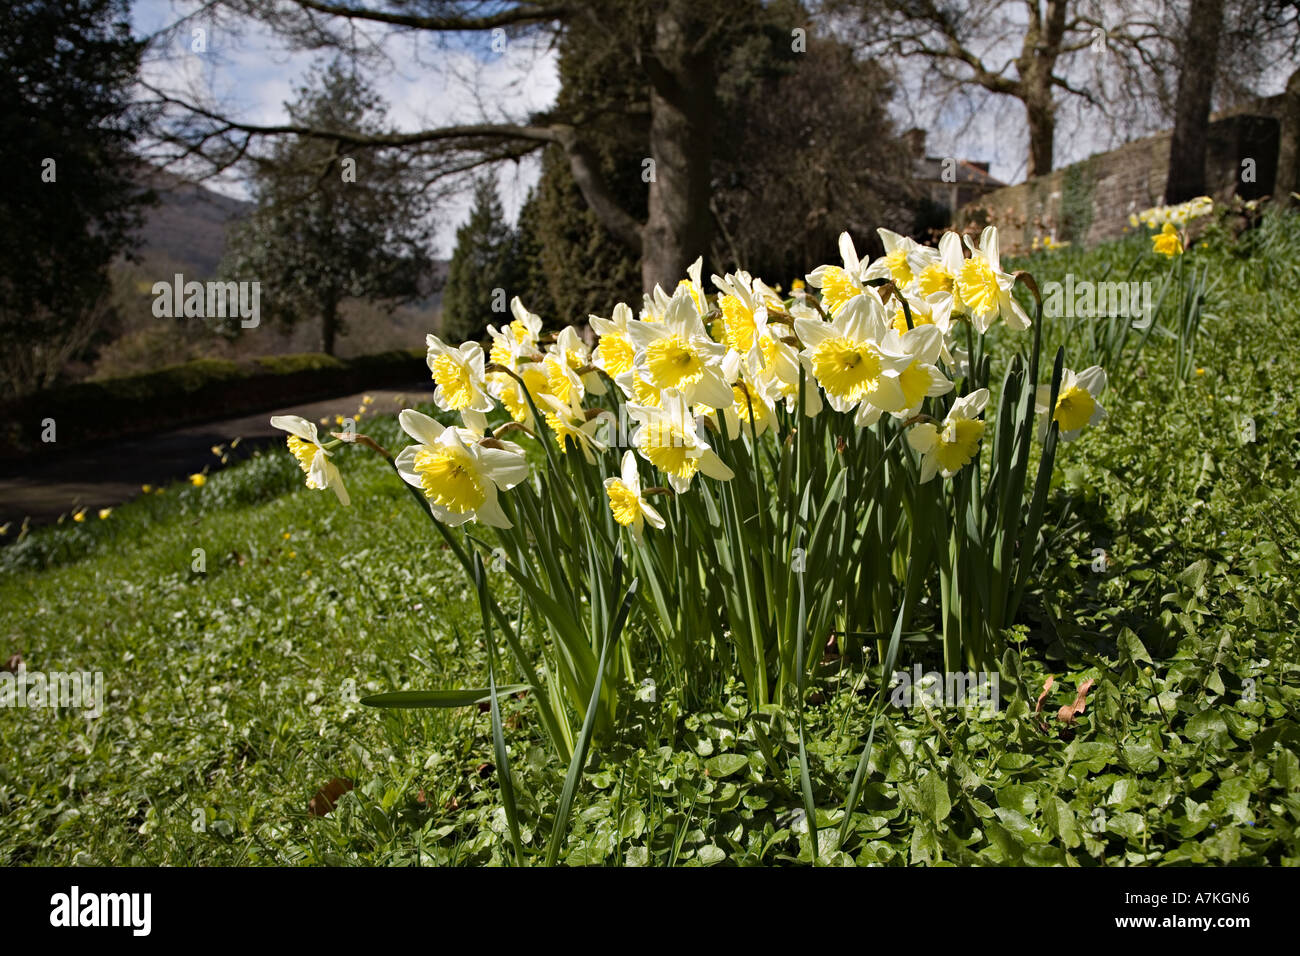 Group of daffodils in garden Wales UK Stock Photo